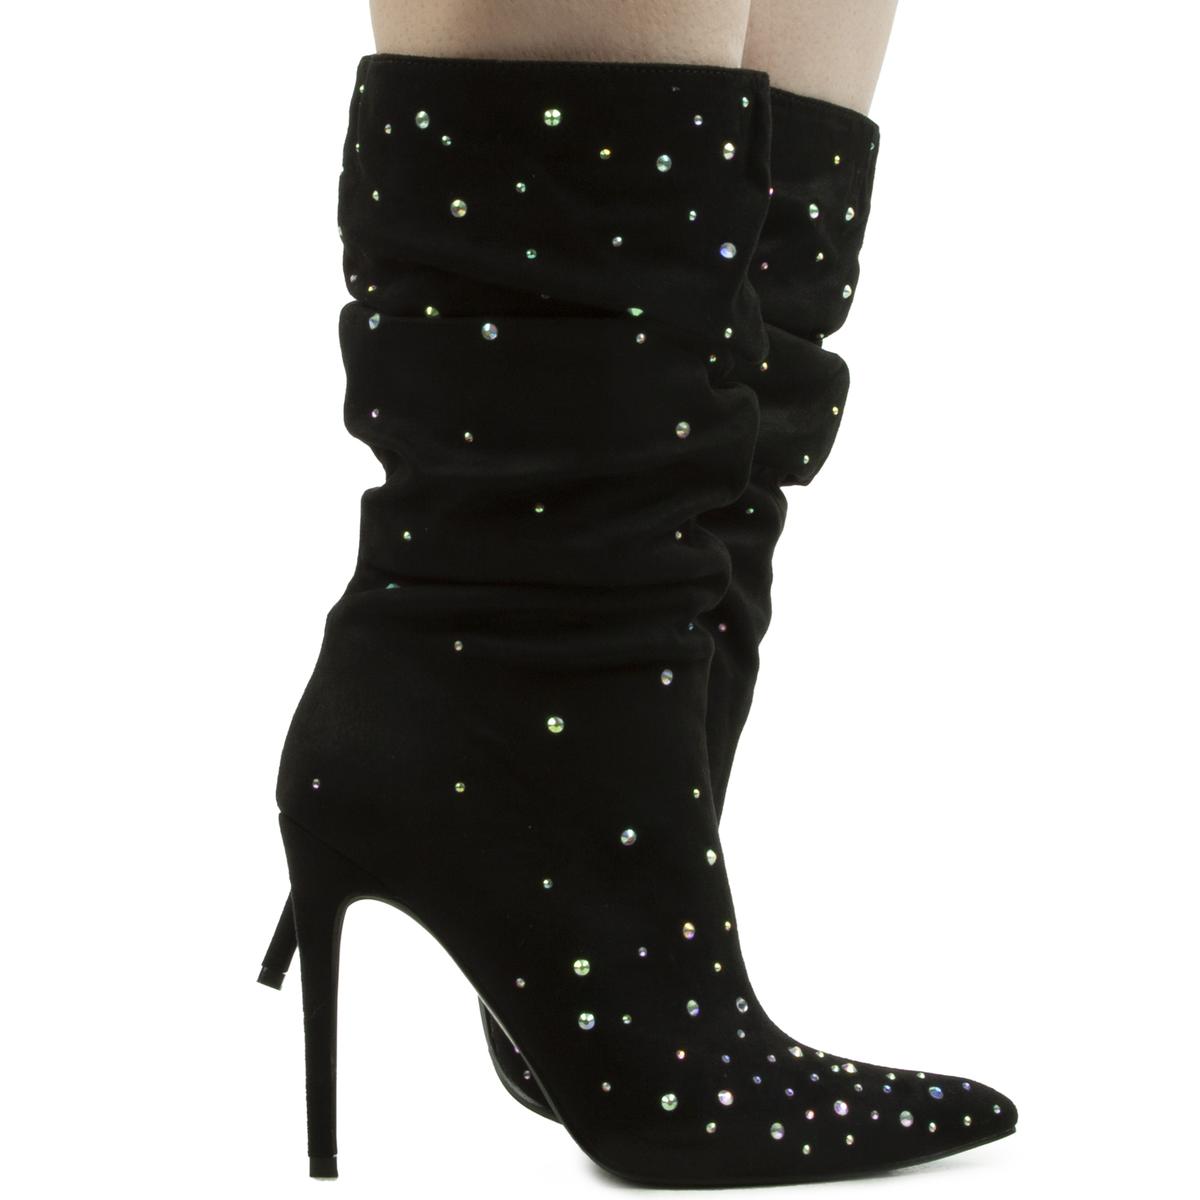 Fancified Studded Boots